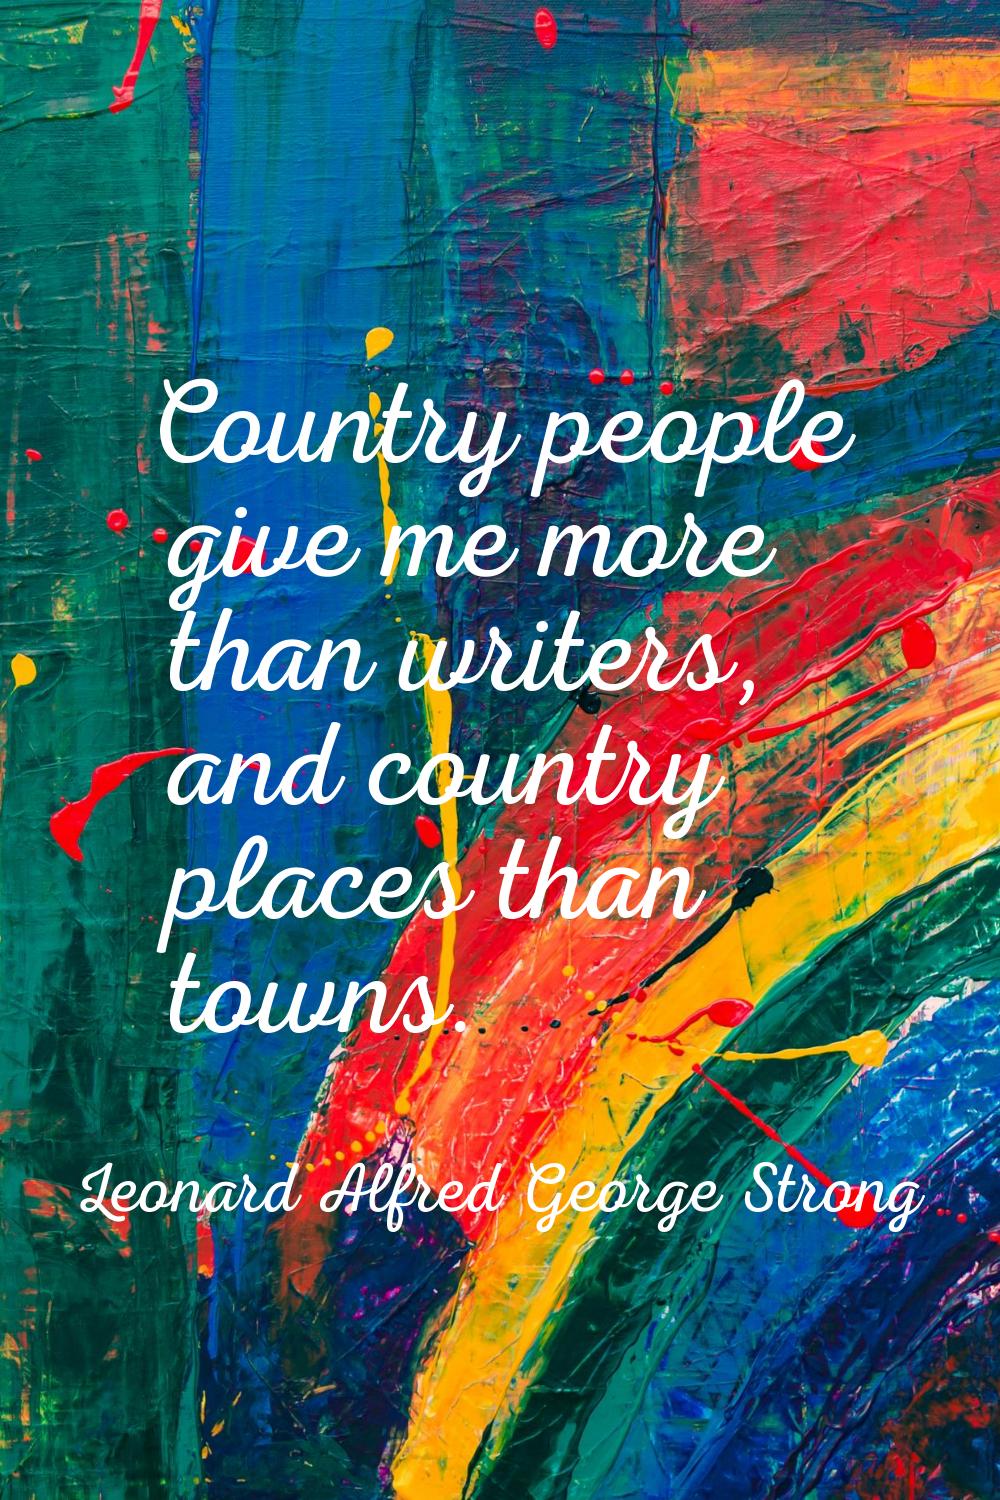 Country people give me more than writers, and country places than towns.